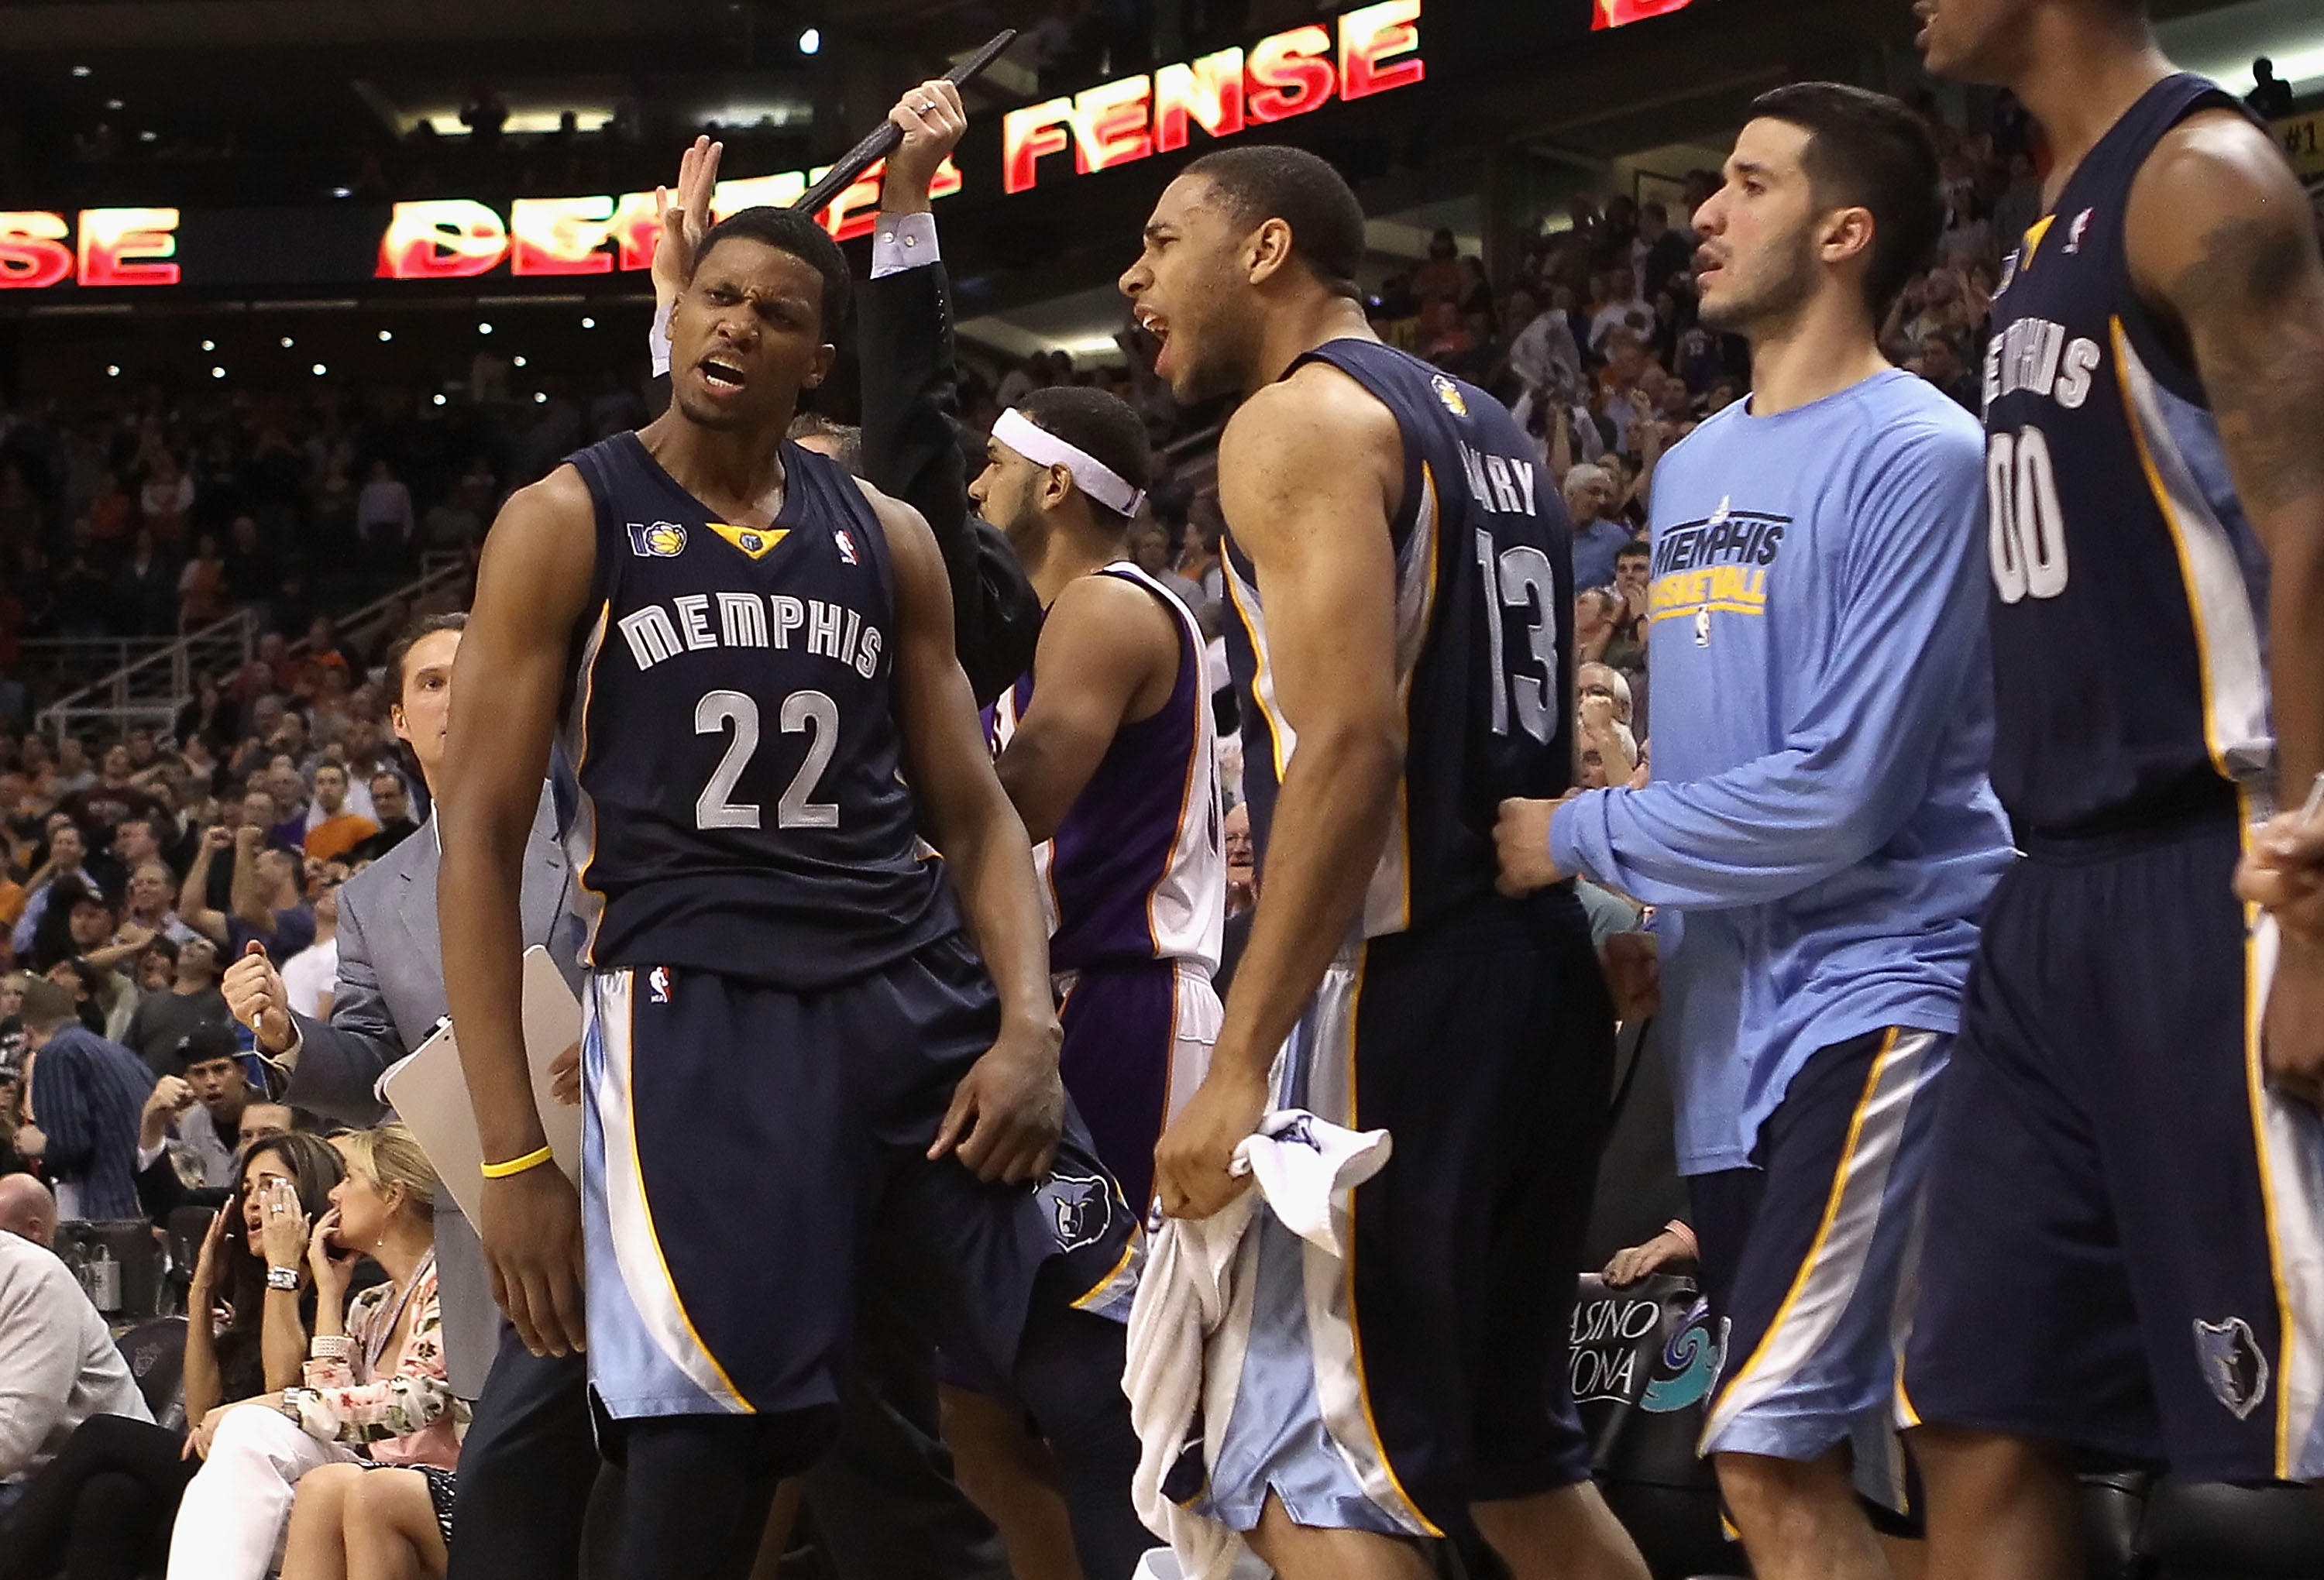 PHOENIX - DECEMBER 08:  Rudy Gay #22 of the Memphis Grizzlies reacts with Xavier Henry #13 after Gay hit the game tying three point shot against the Phoenix Suns at the end of regulation in the NBA game at US Airways Center on December 8, 2010 in Phoenix,